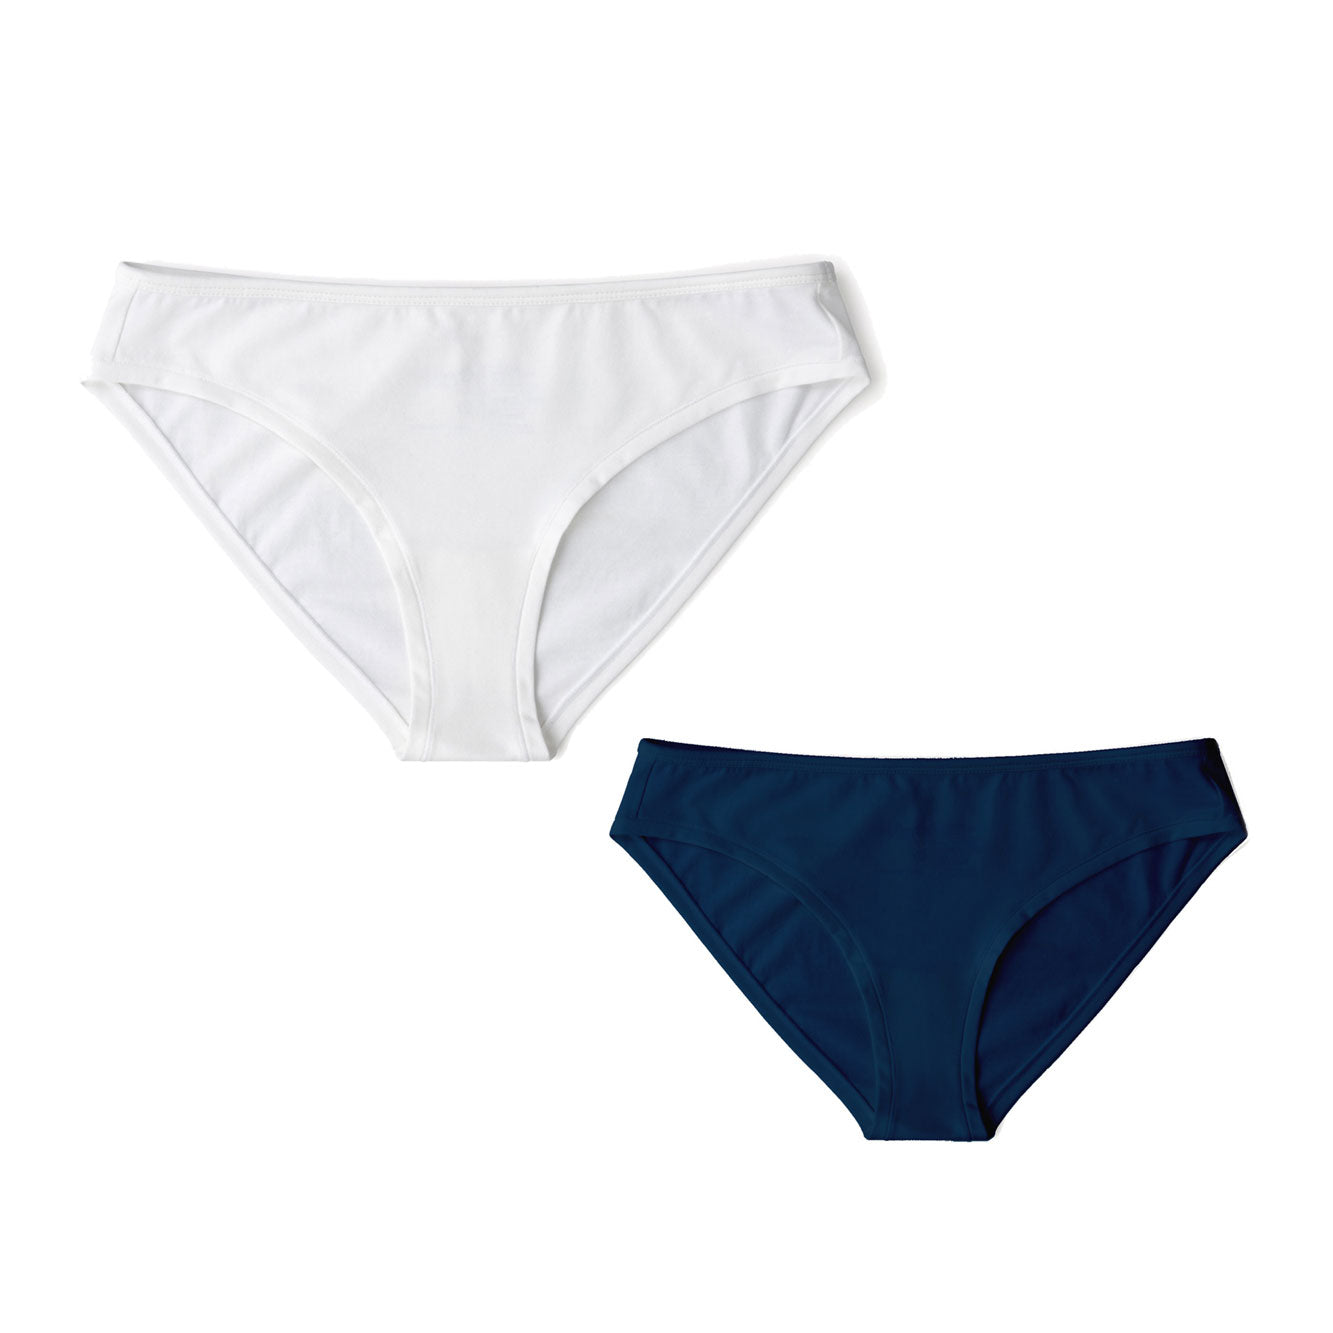 Navy and White ladies underwear, mid rise briefs, first fit promise 2 pack